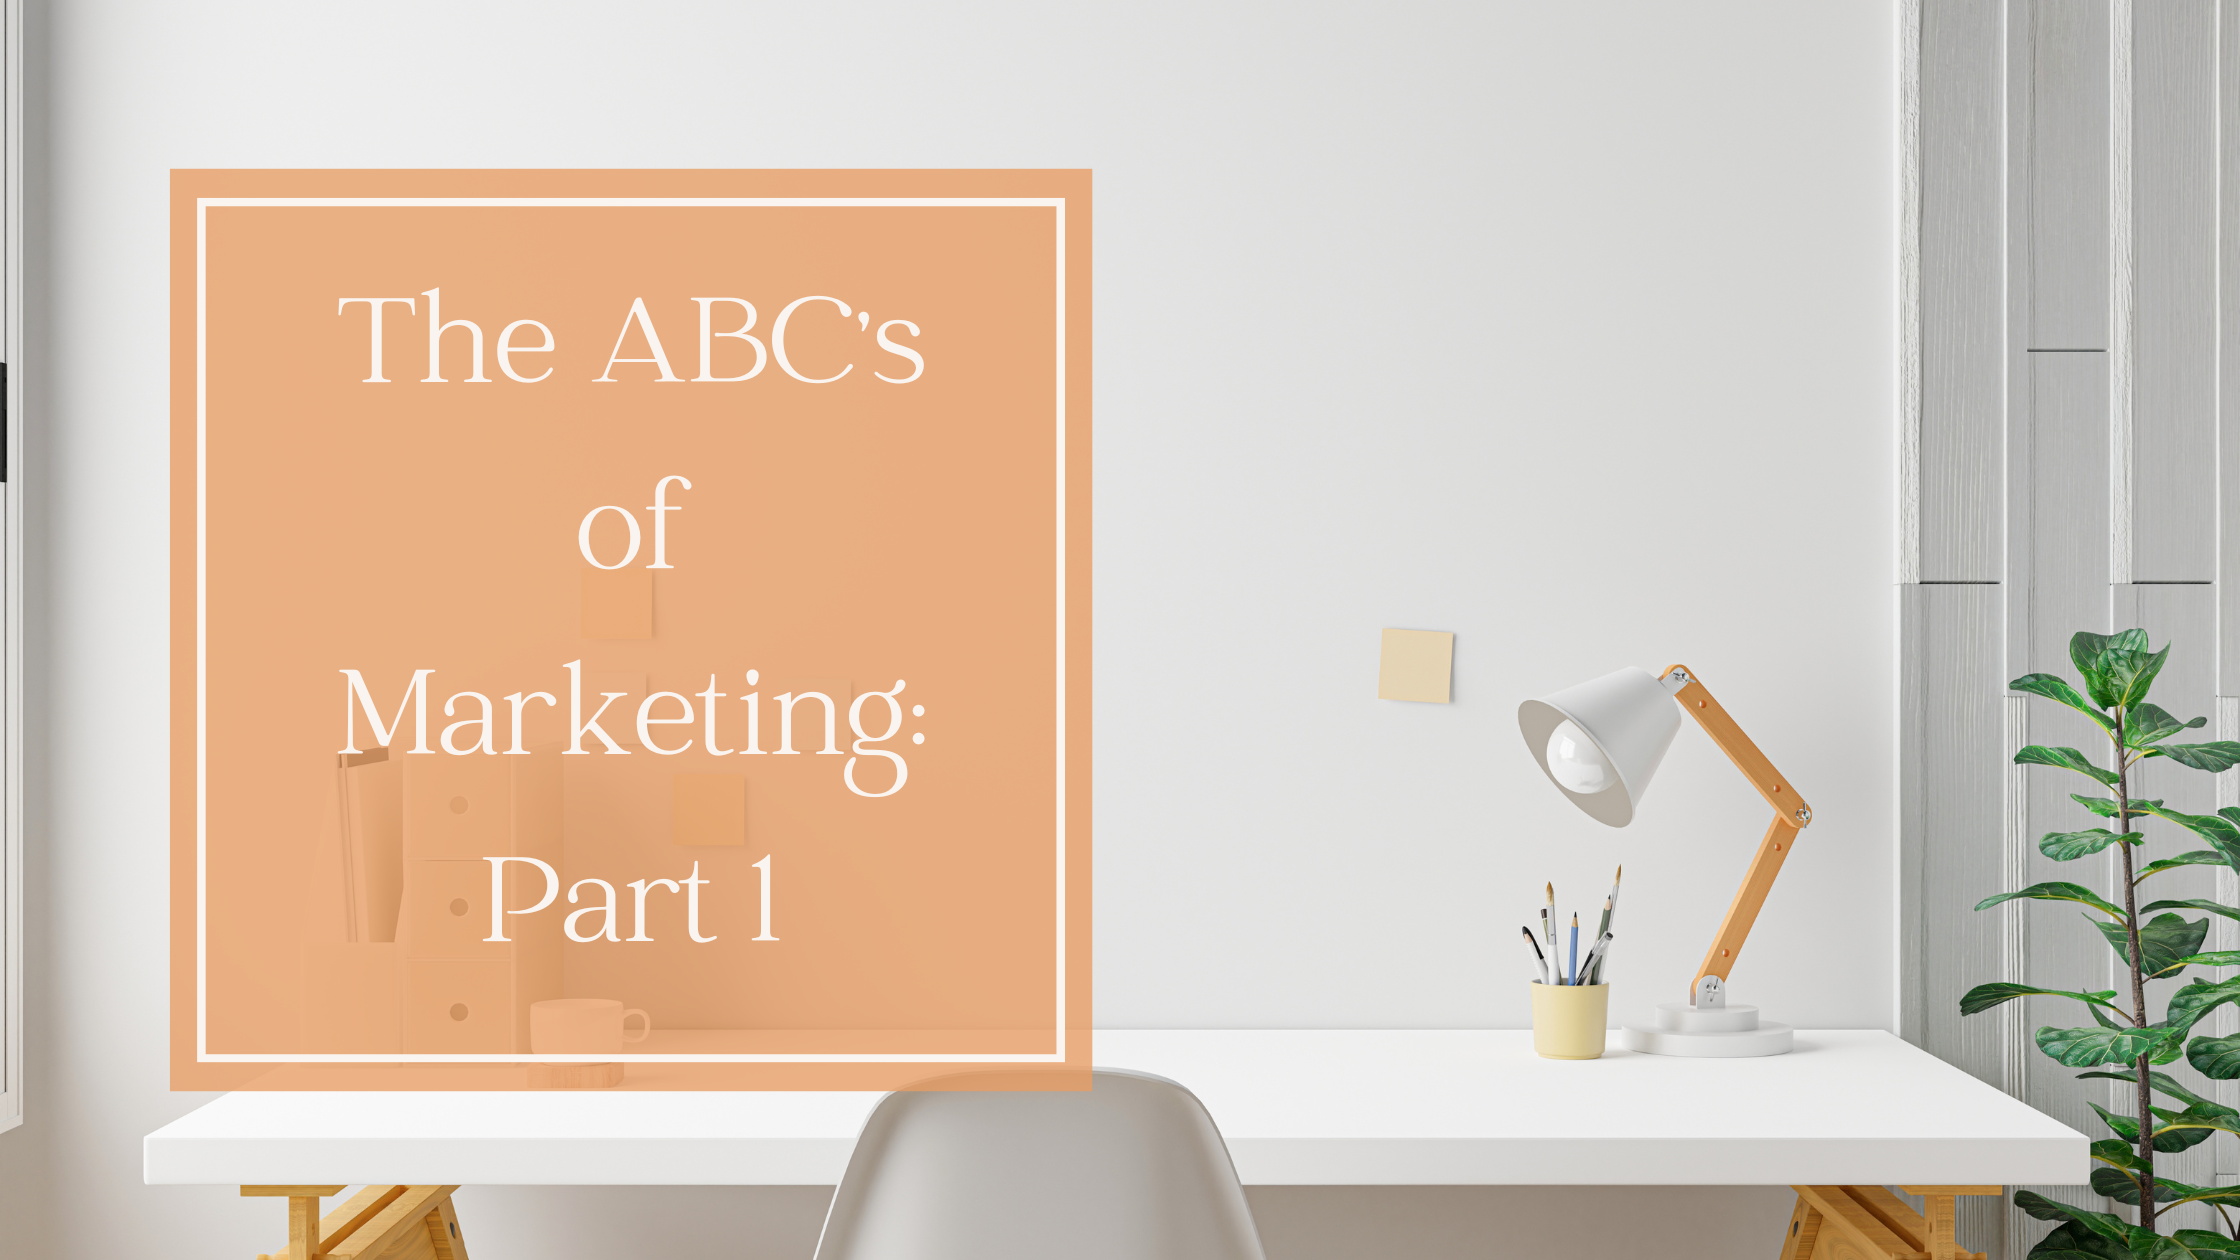 The ABC's of Marketing: Part 1